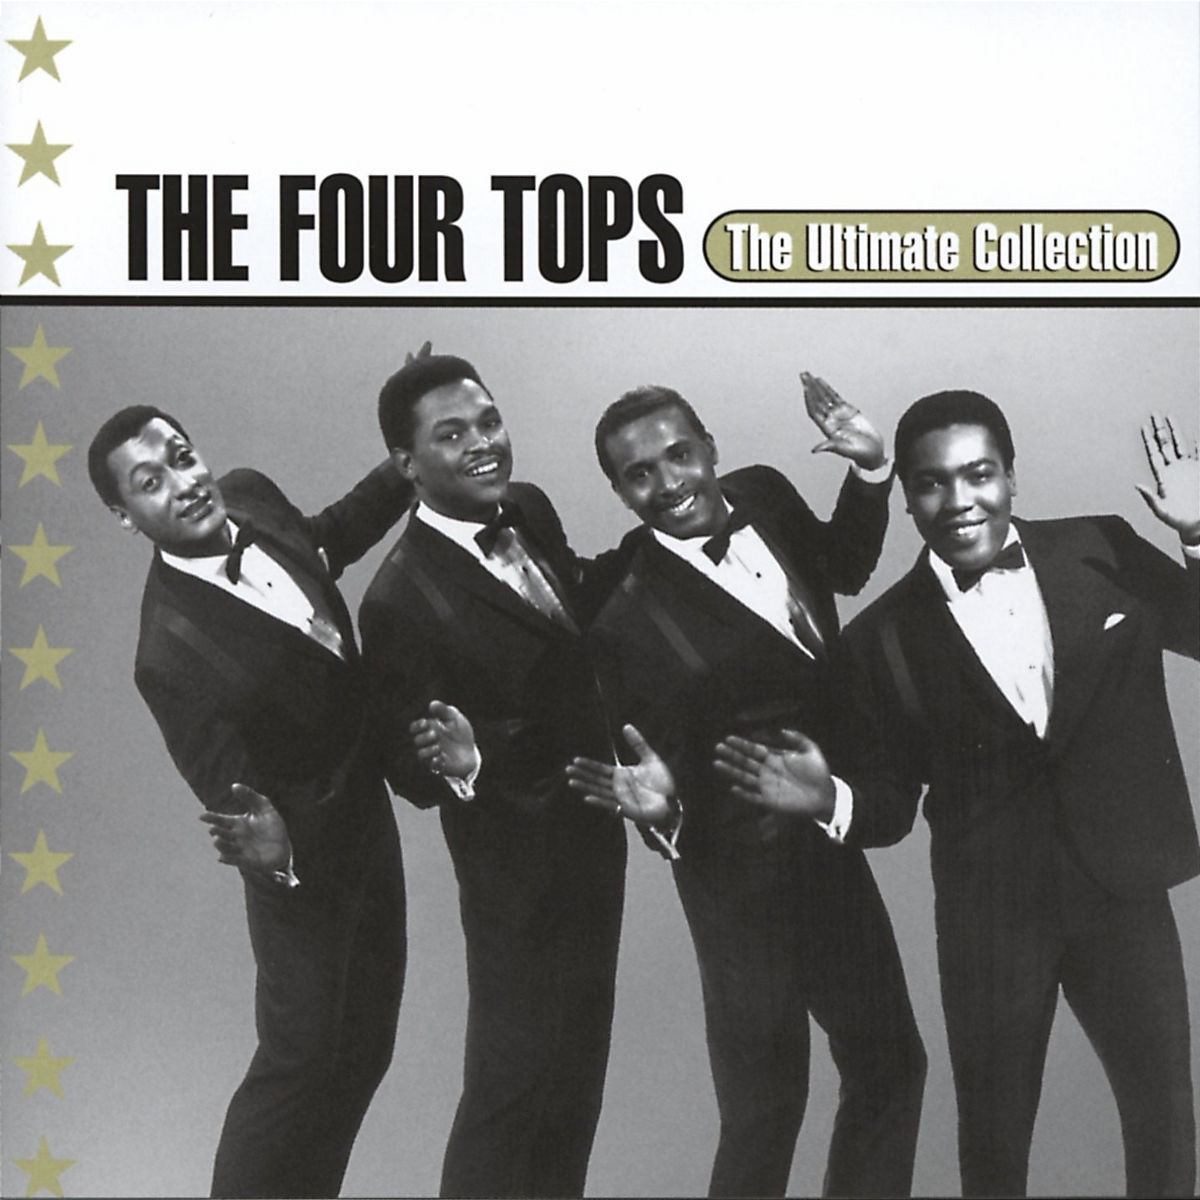 The Ultimate Collection: Four Tops - The Four Tops. (CD)